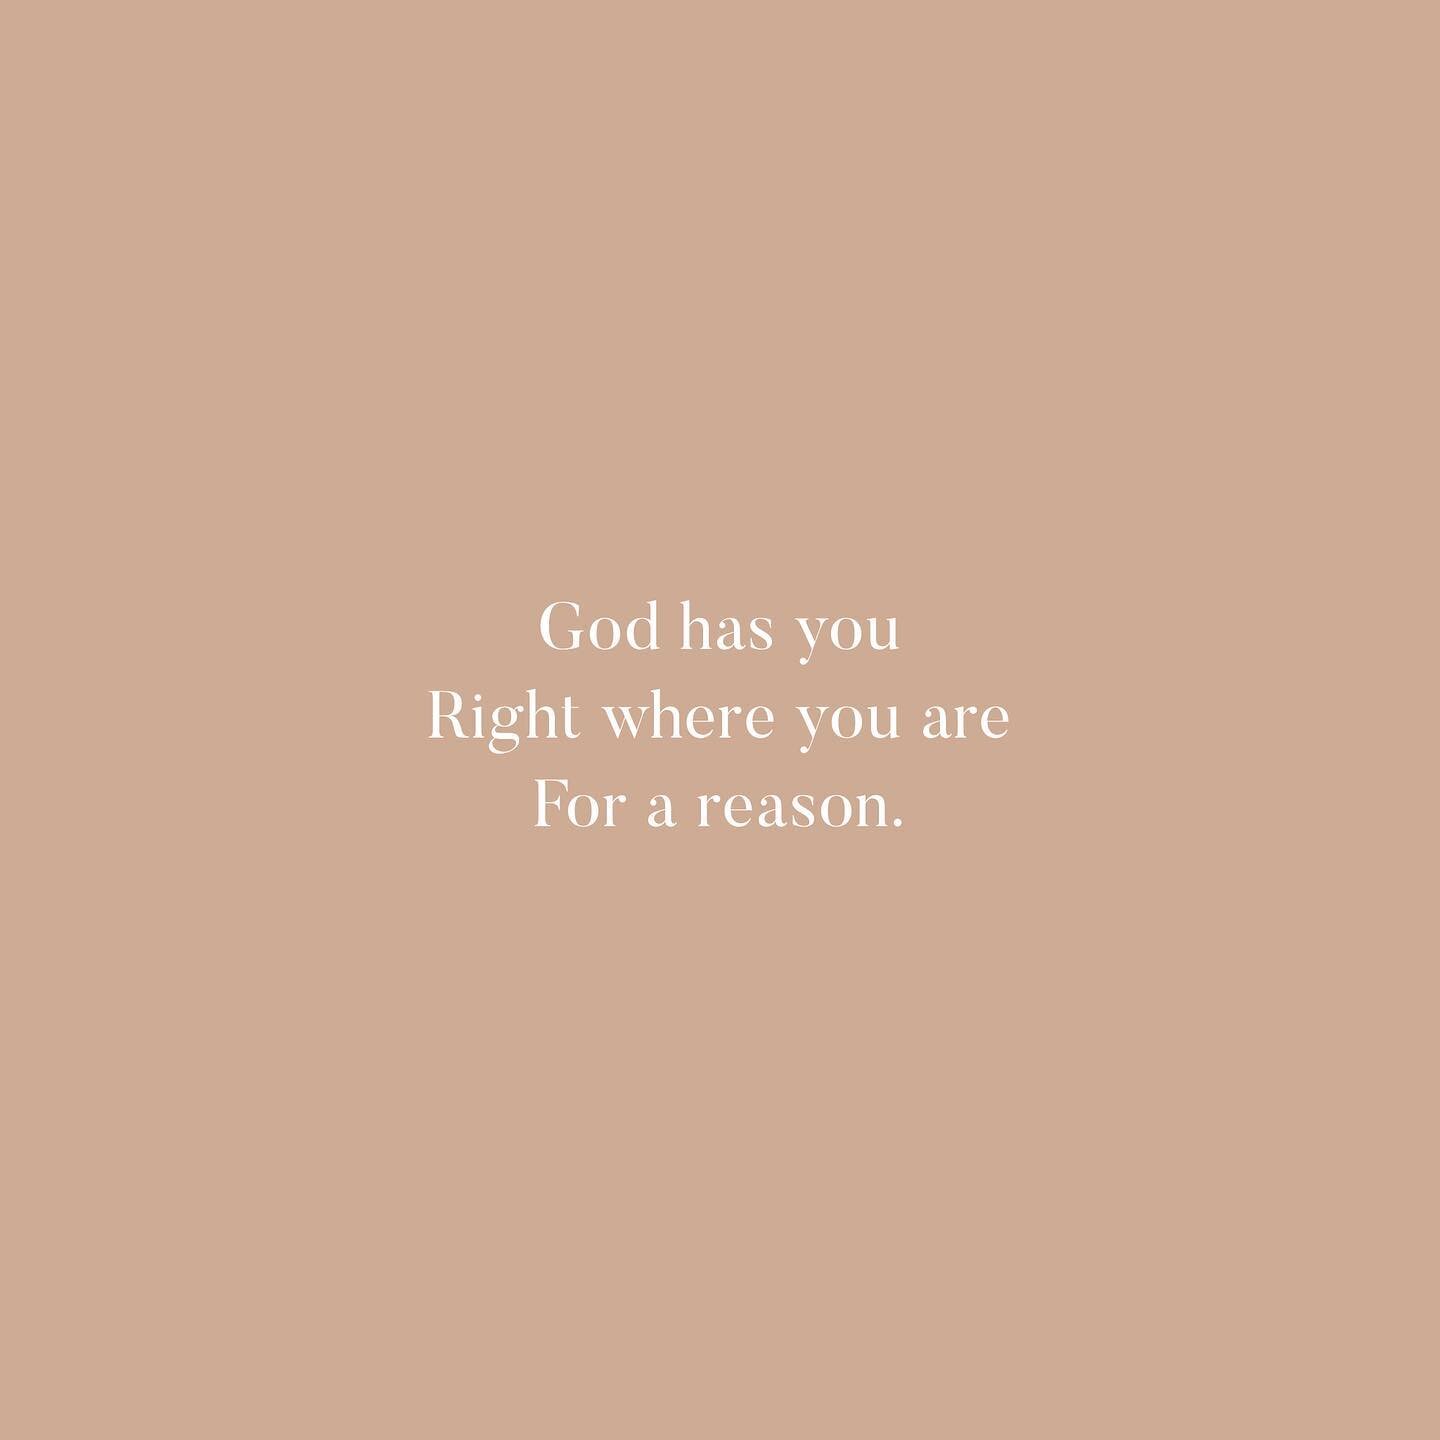 It&rsquo;s hard not to get caught up in the bigger is better, more is worth more mentality.  The reality is&hellip;. God has you where you are for a reason.  Whether it is where you live, what job you have, the growth of your company&hellip; wherever